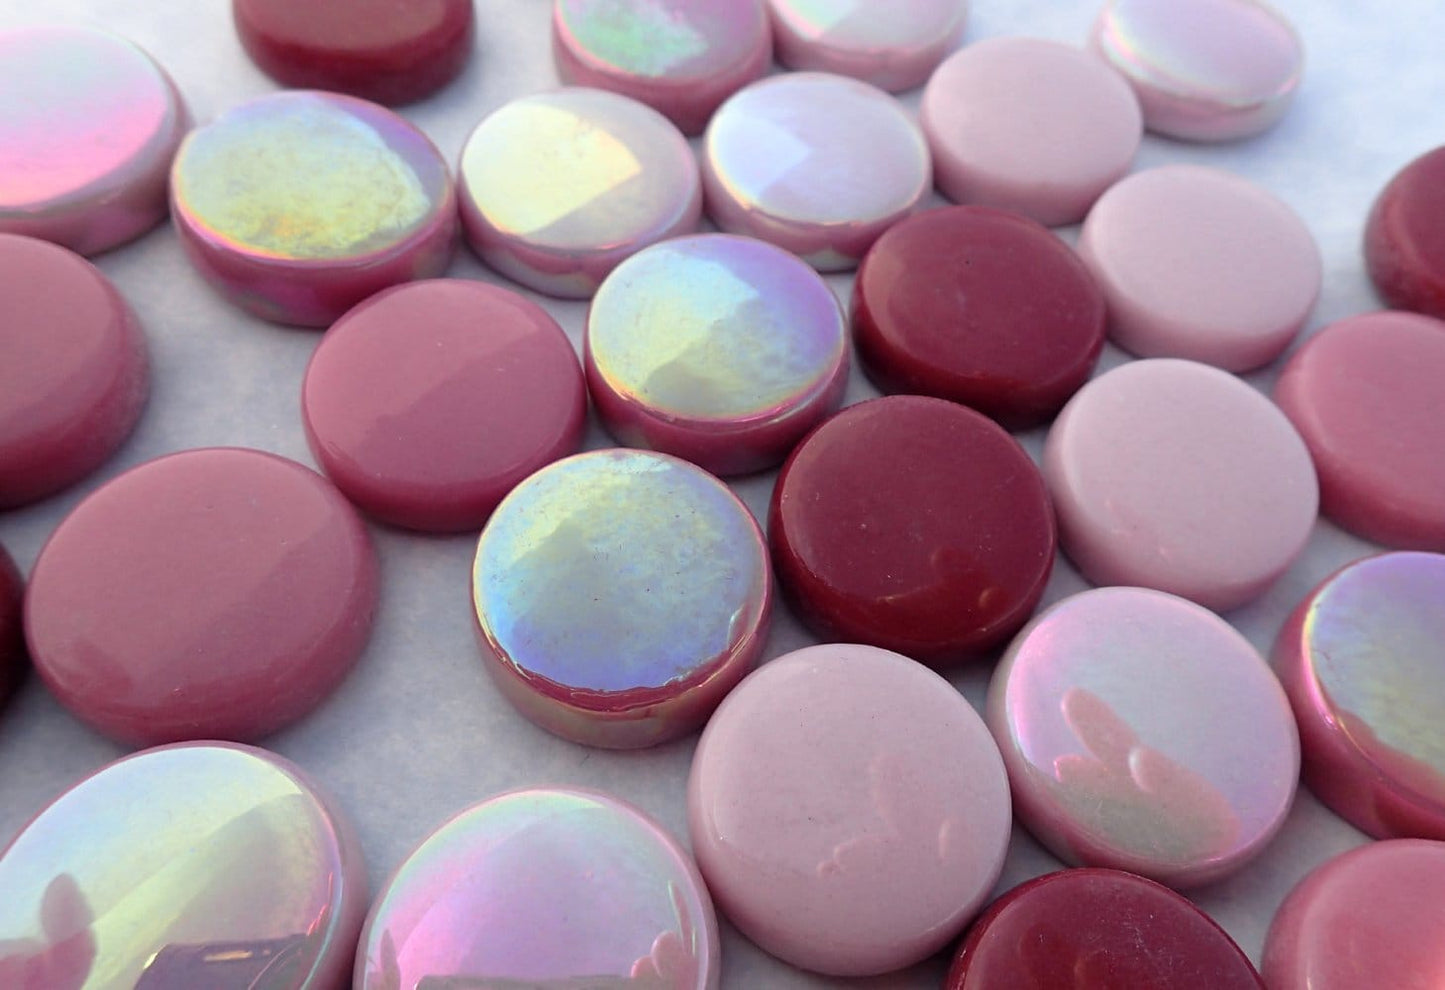 Pink Mix Large Glass Drops - 100 grams - 20mm Mix of Gloss and Iridescent Glass Gems - Approx 20 Tiles